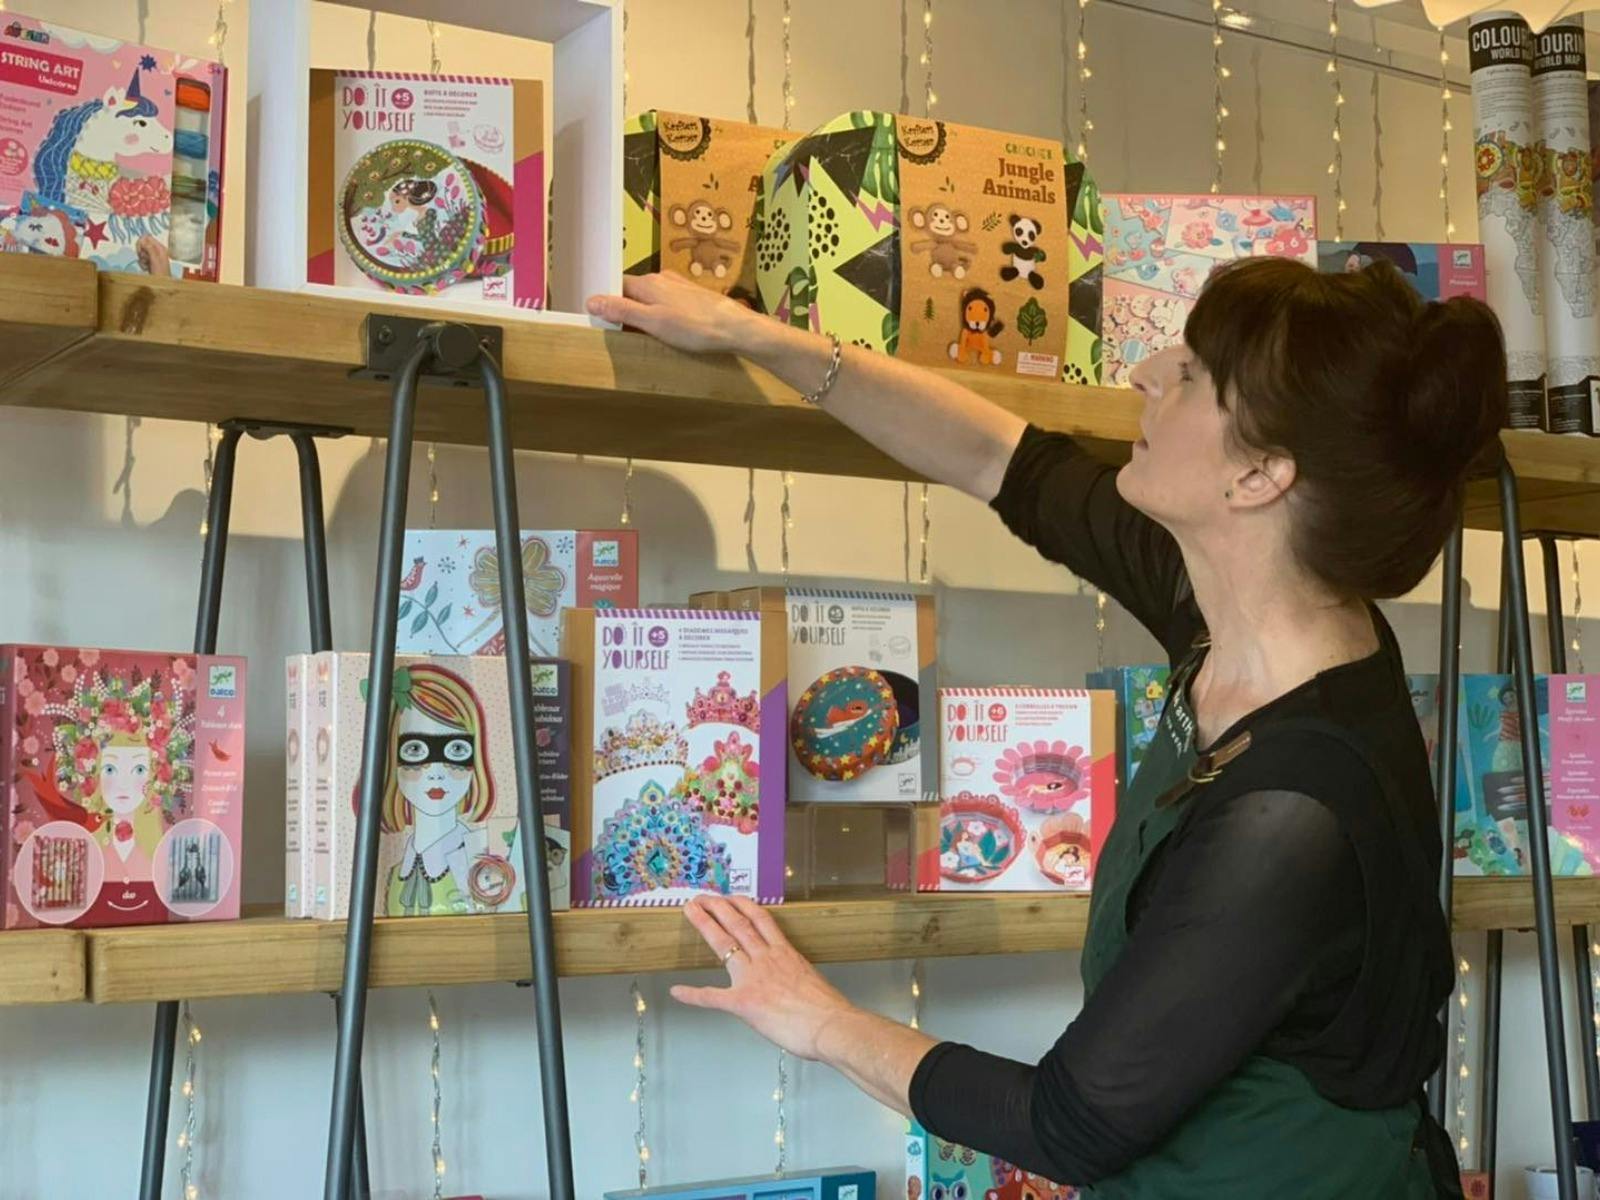 Nicola is the owner of the artHouse. She is reaching up arranging the products on the shelves